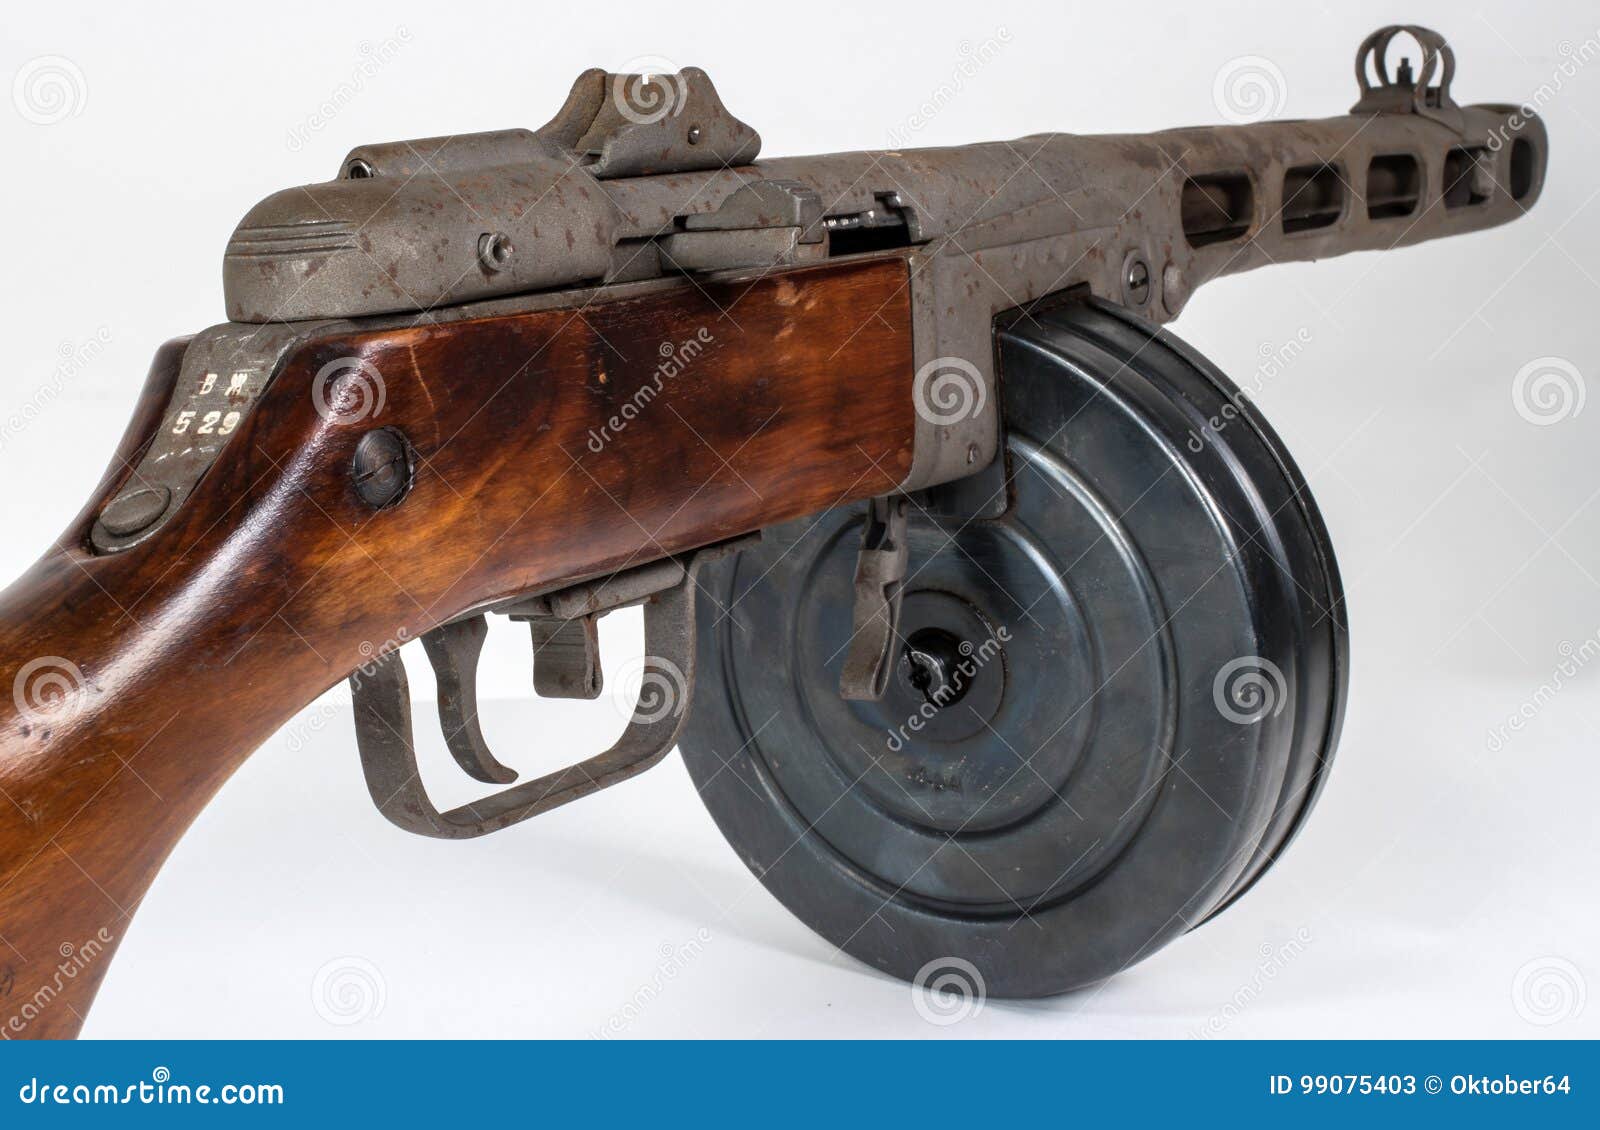 Submachine Gun Ppsh-41 on a Light Background. Stock Image - Image of ...